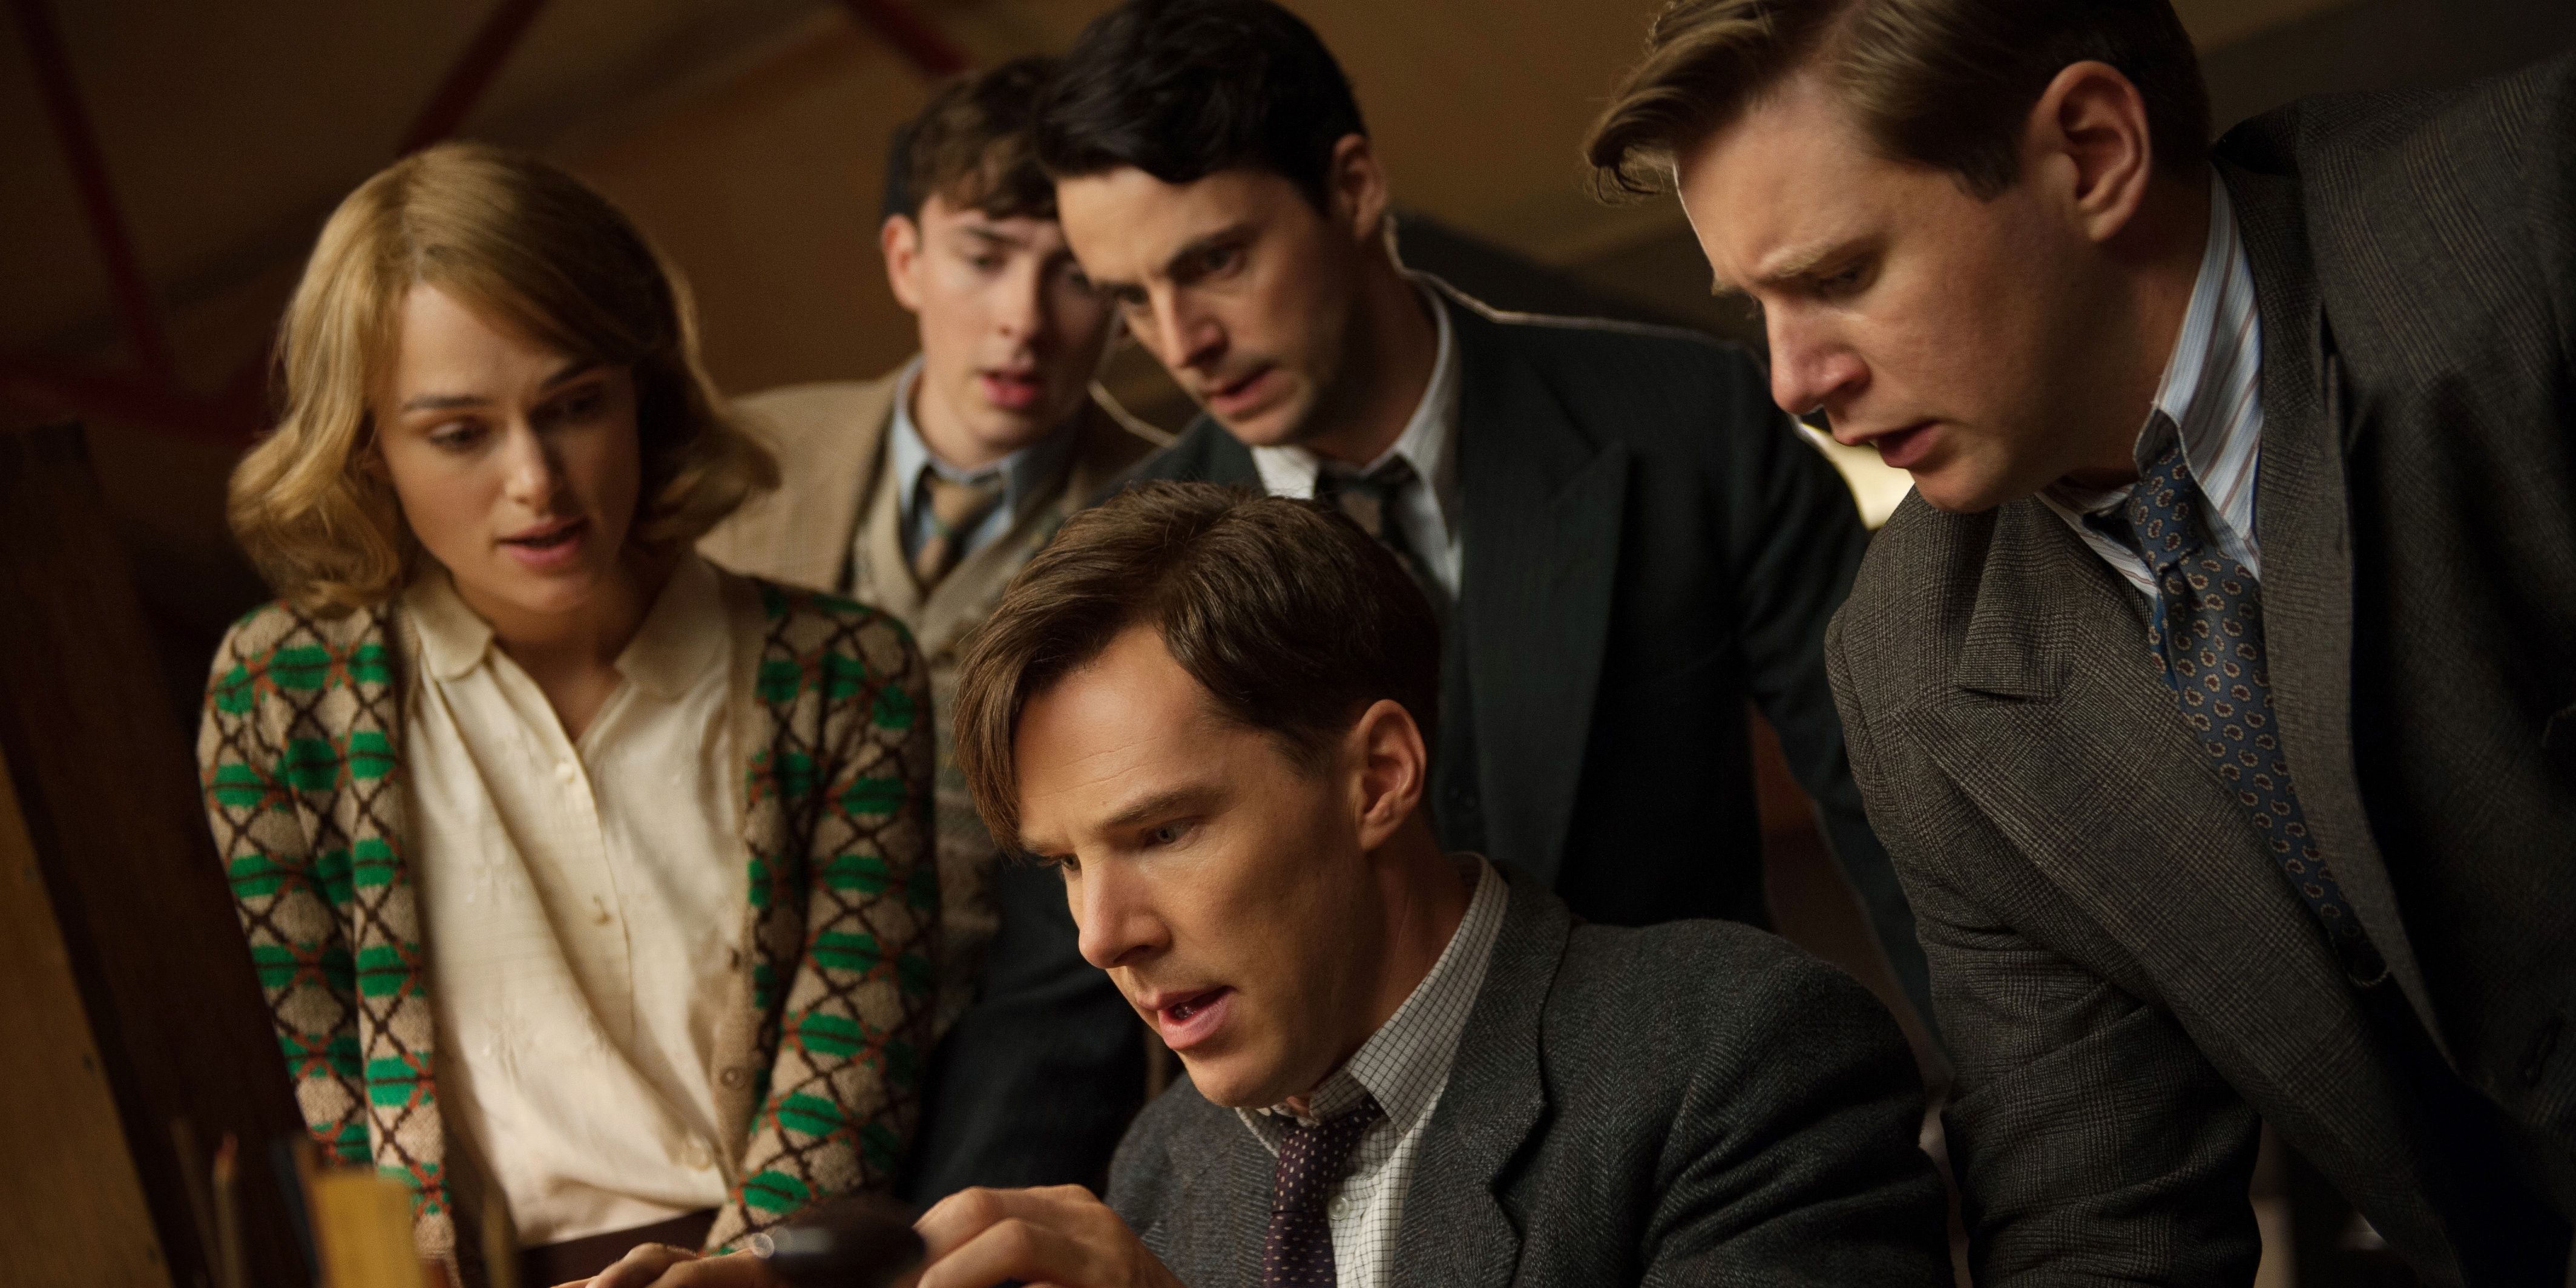 Alan-Turing-and-his-team-work-on-cracking-the-Enigma-in-The-Imitation-Code